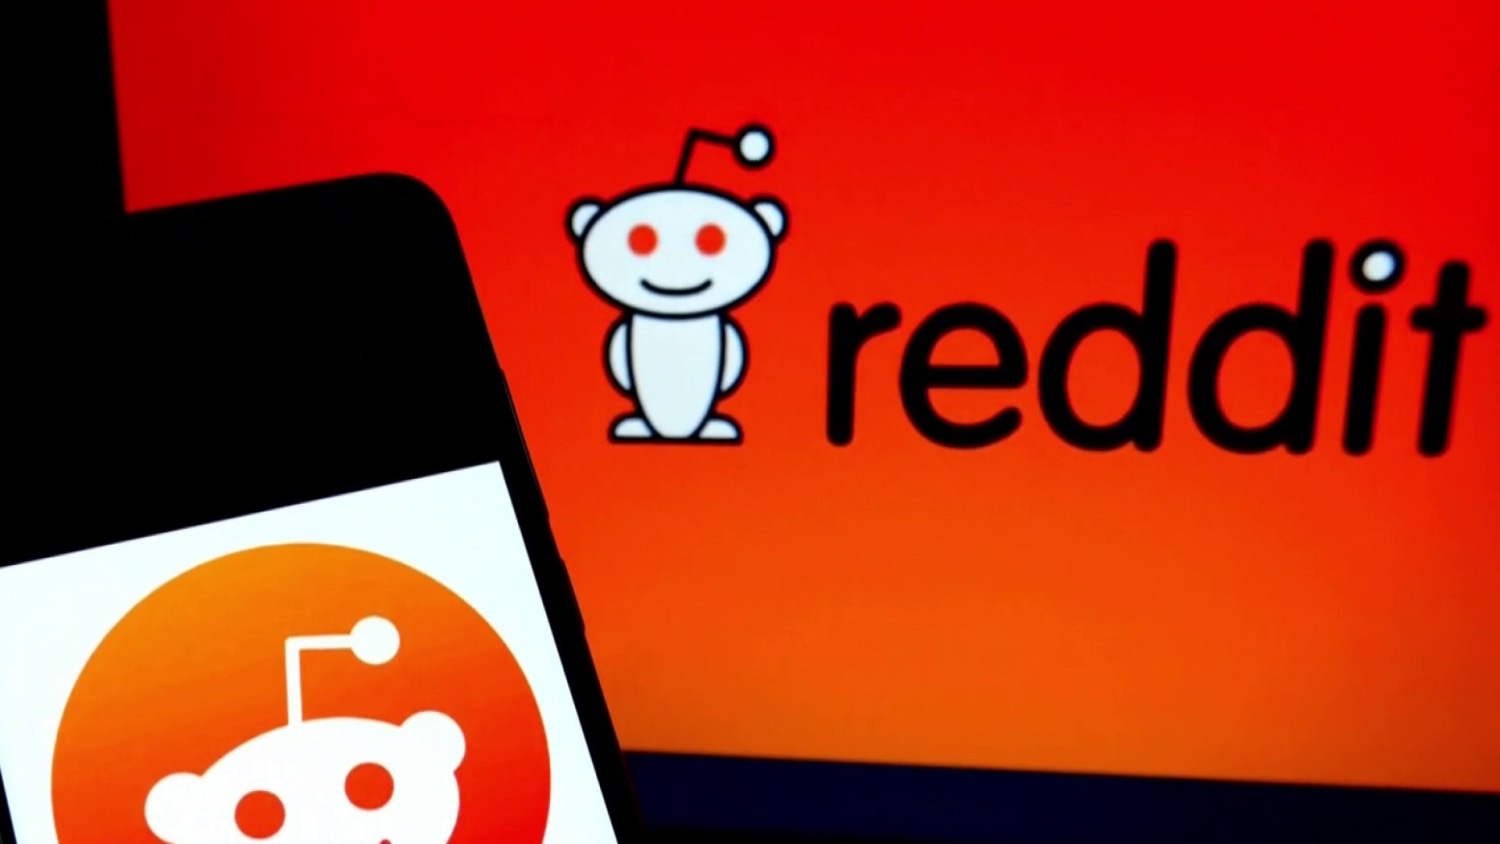 Reddit CEO Vows to Tackle Mod Power in Response to Widespread Blackout